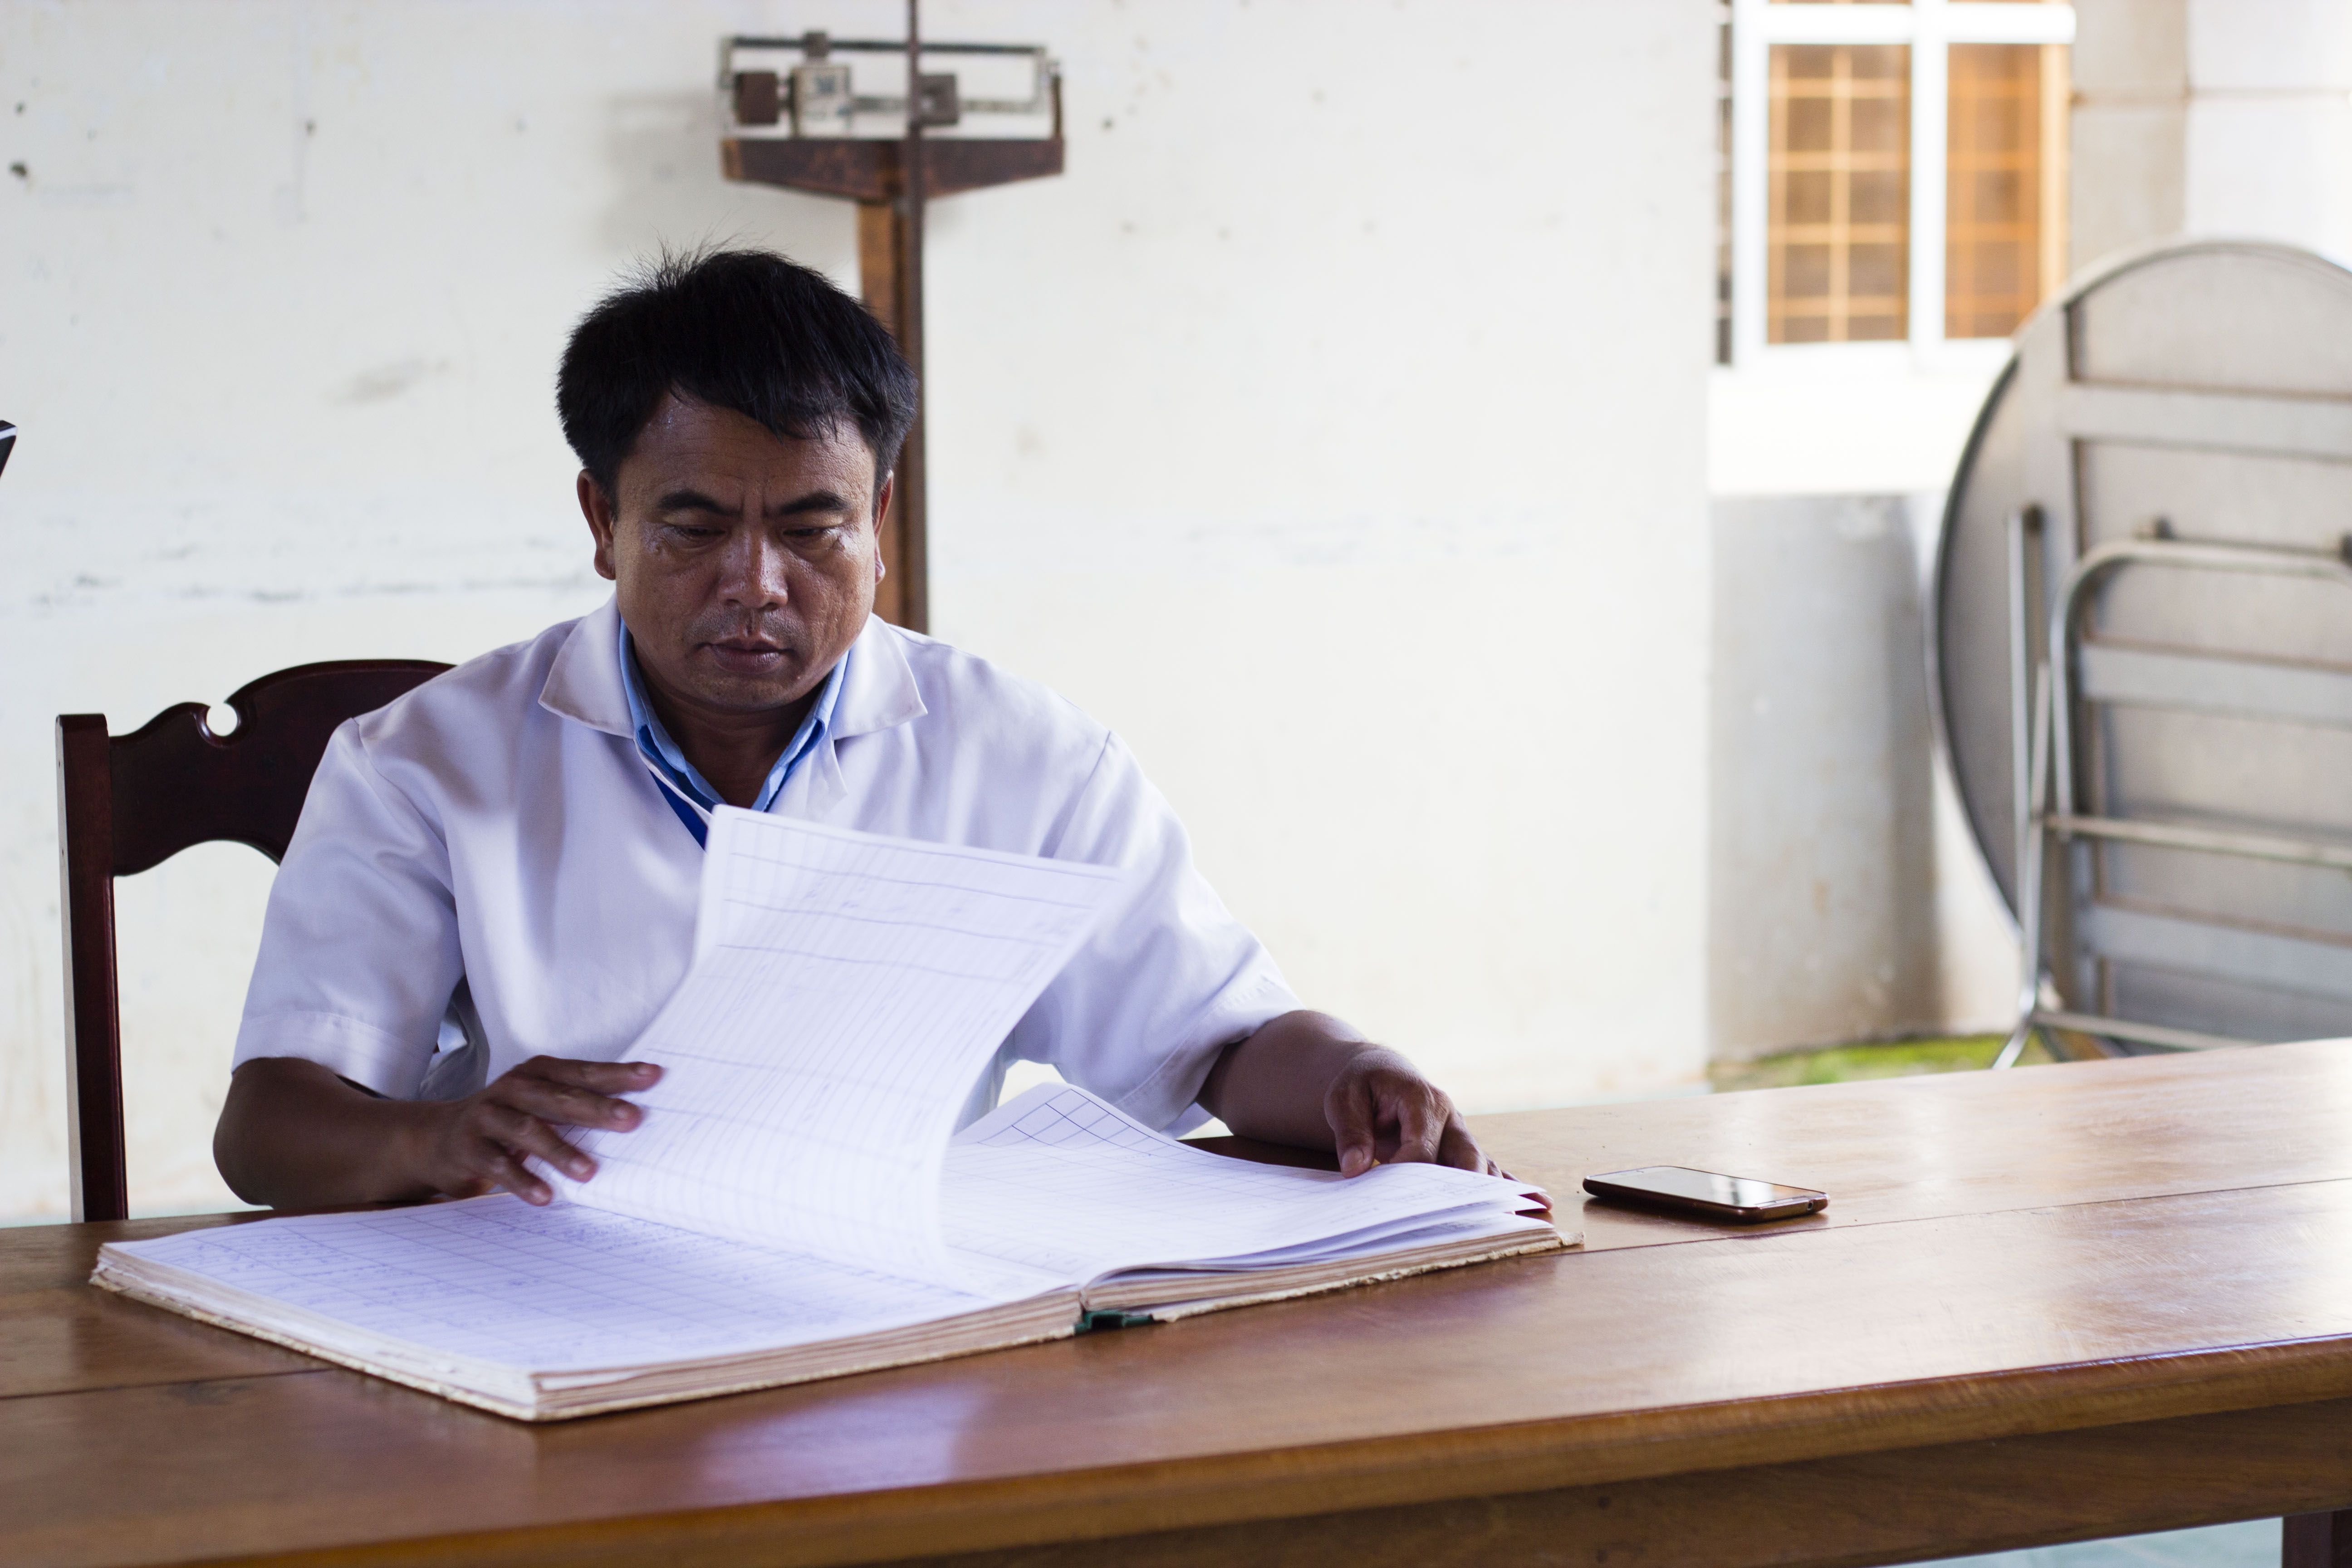 A doctor from the Thakhek Health Clinic reviews his records, telling the crew about recent UXO accidents. Image by Erin McGoff. Laos, 2017.